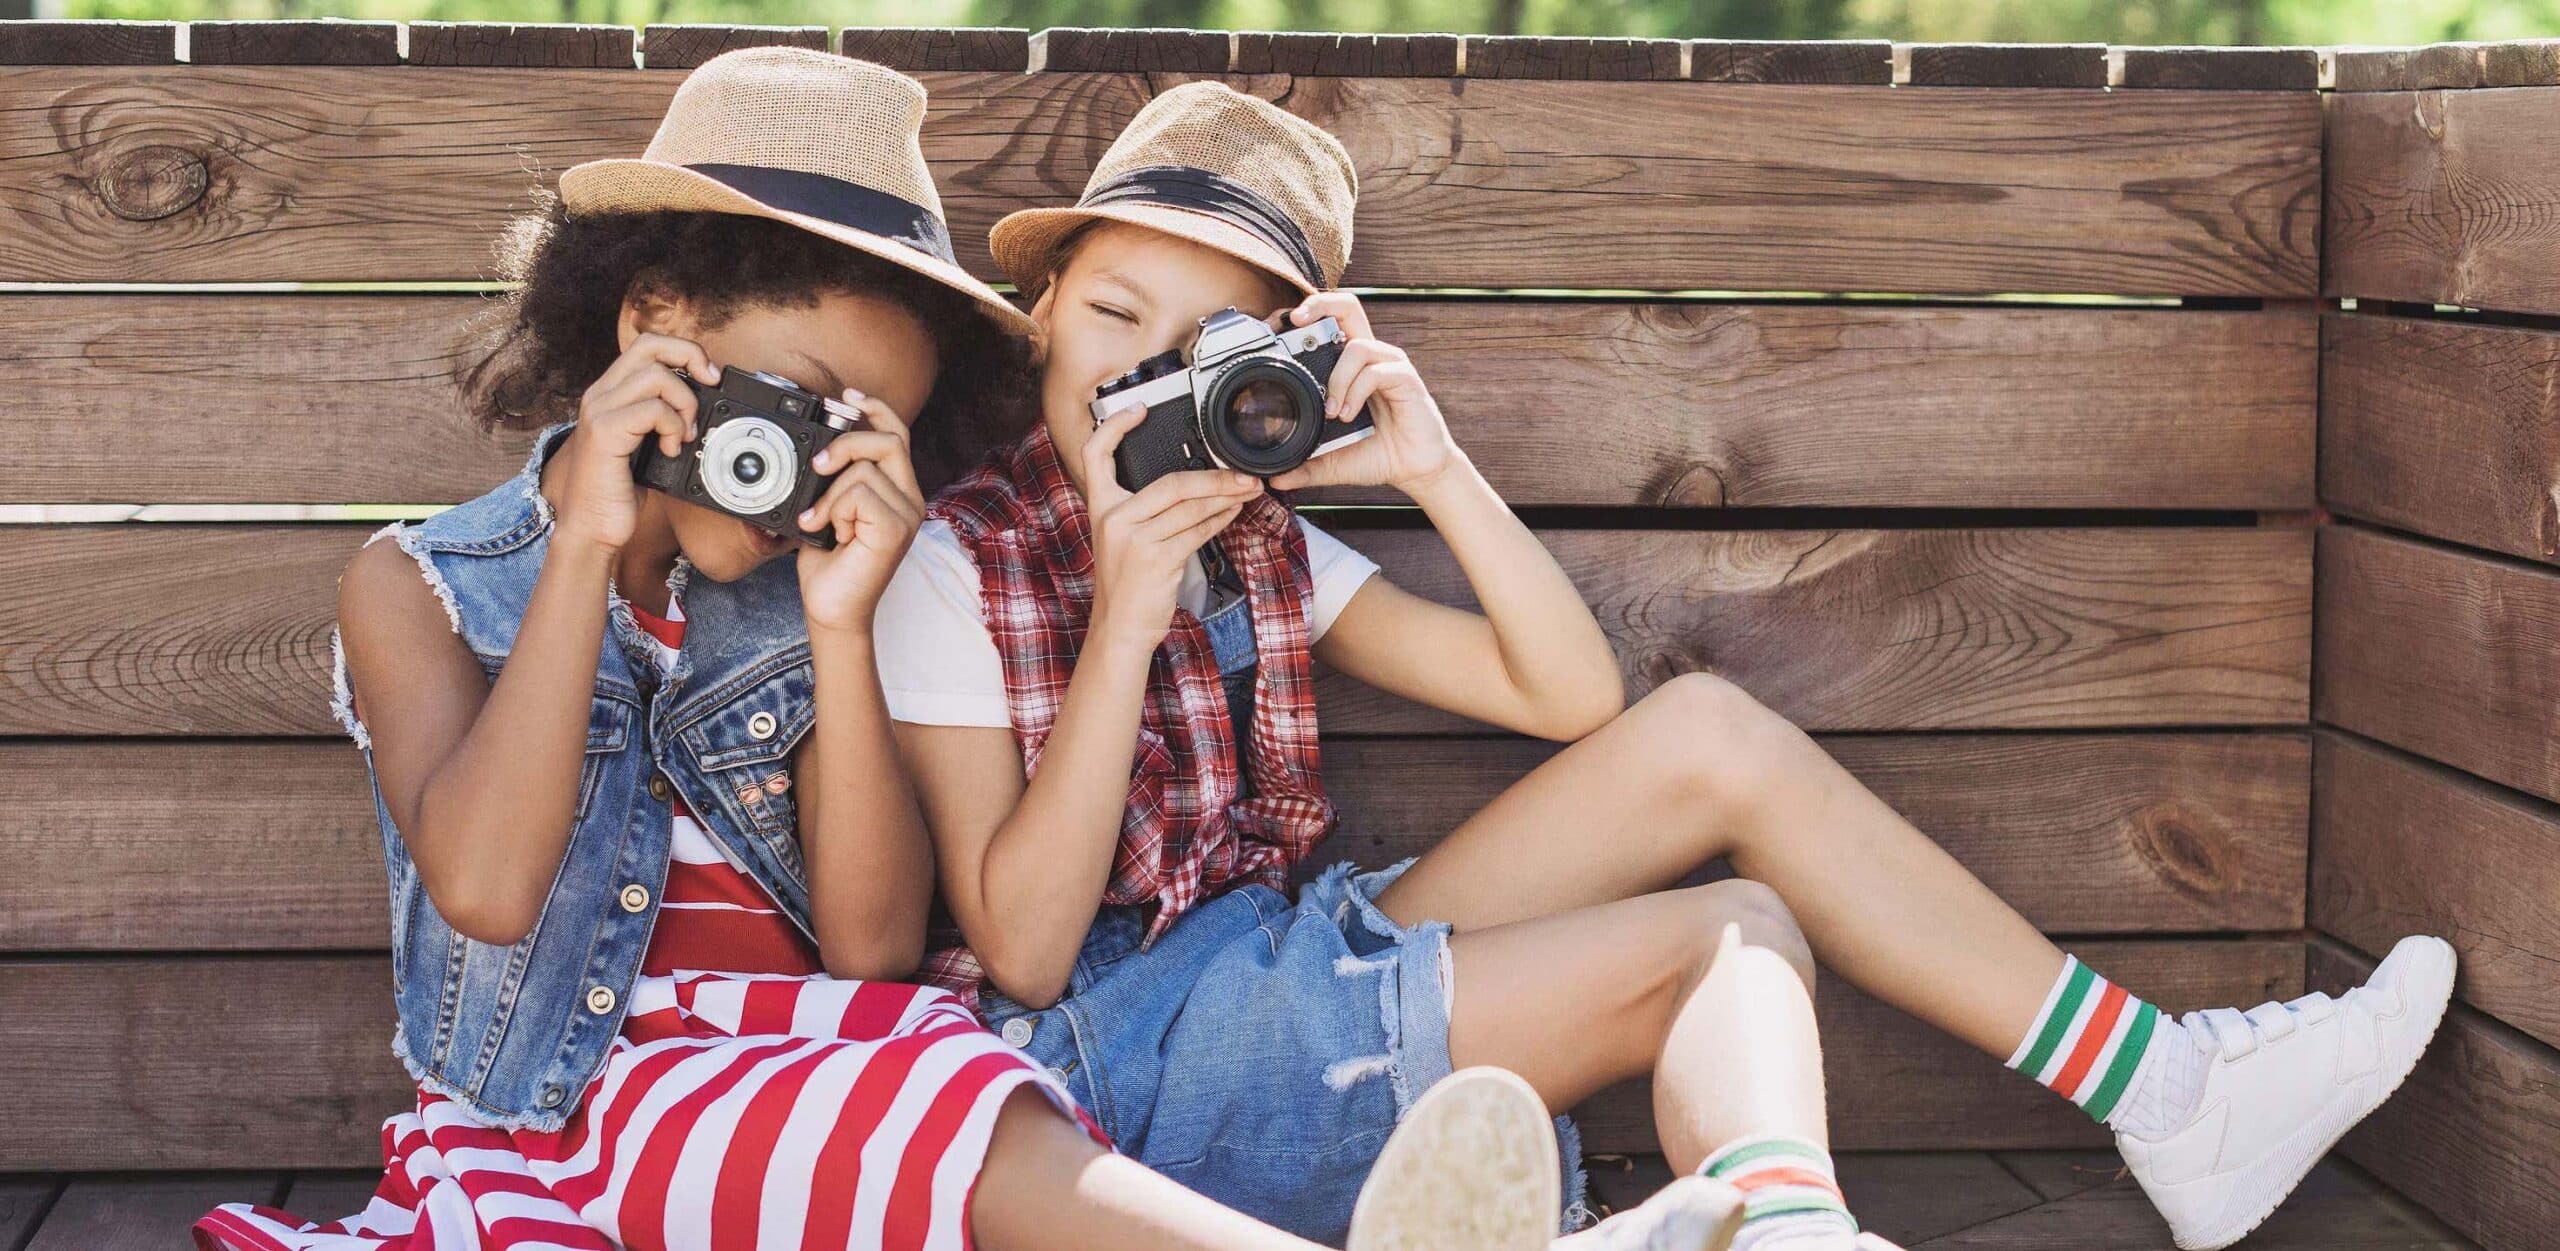 How Parents Can Save Money While Keeping Children Entertained This Summer